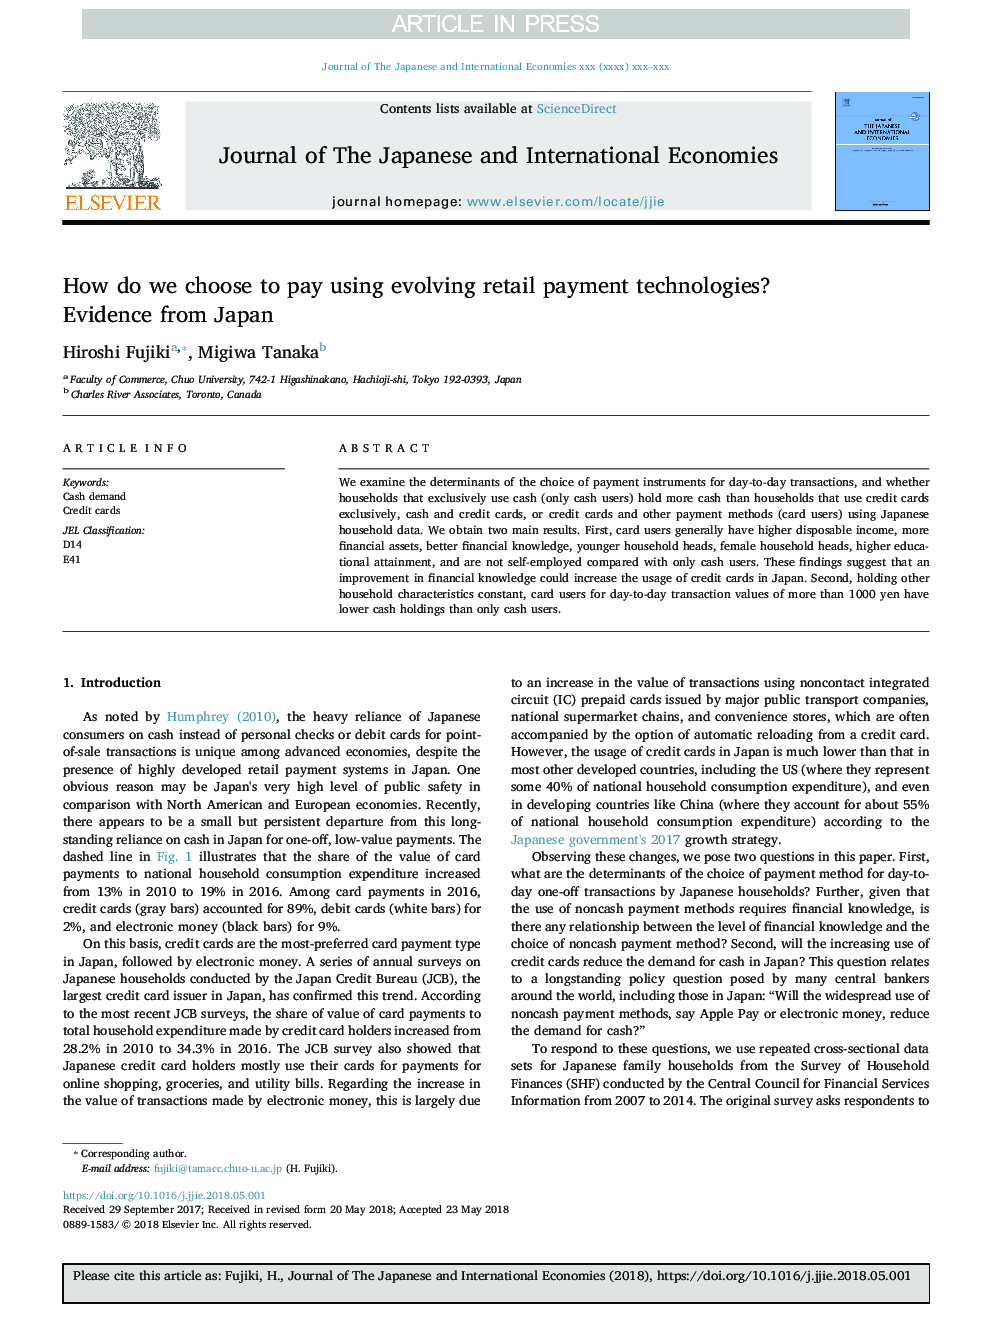 How do we choose to pay using evolving retail payment technologies? Evidence from Japan